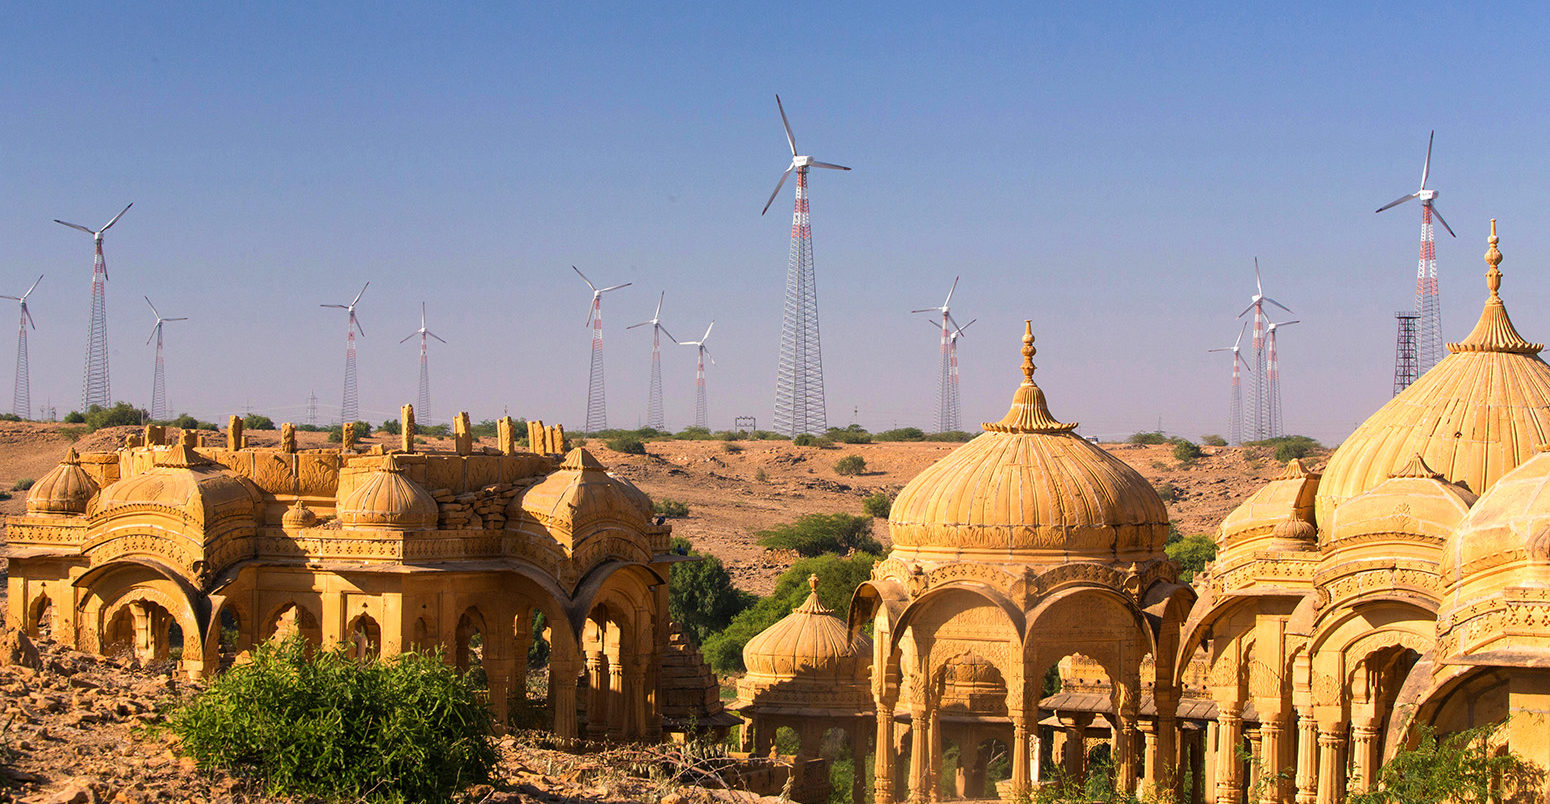 Wind turbines line the horizon behind Bada Bagh in Rajasthan, India. Credit: Prisma by Dukas Presseagentur GmbH / Alamy Stock Photo. DY917M